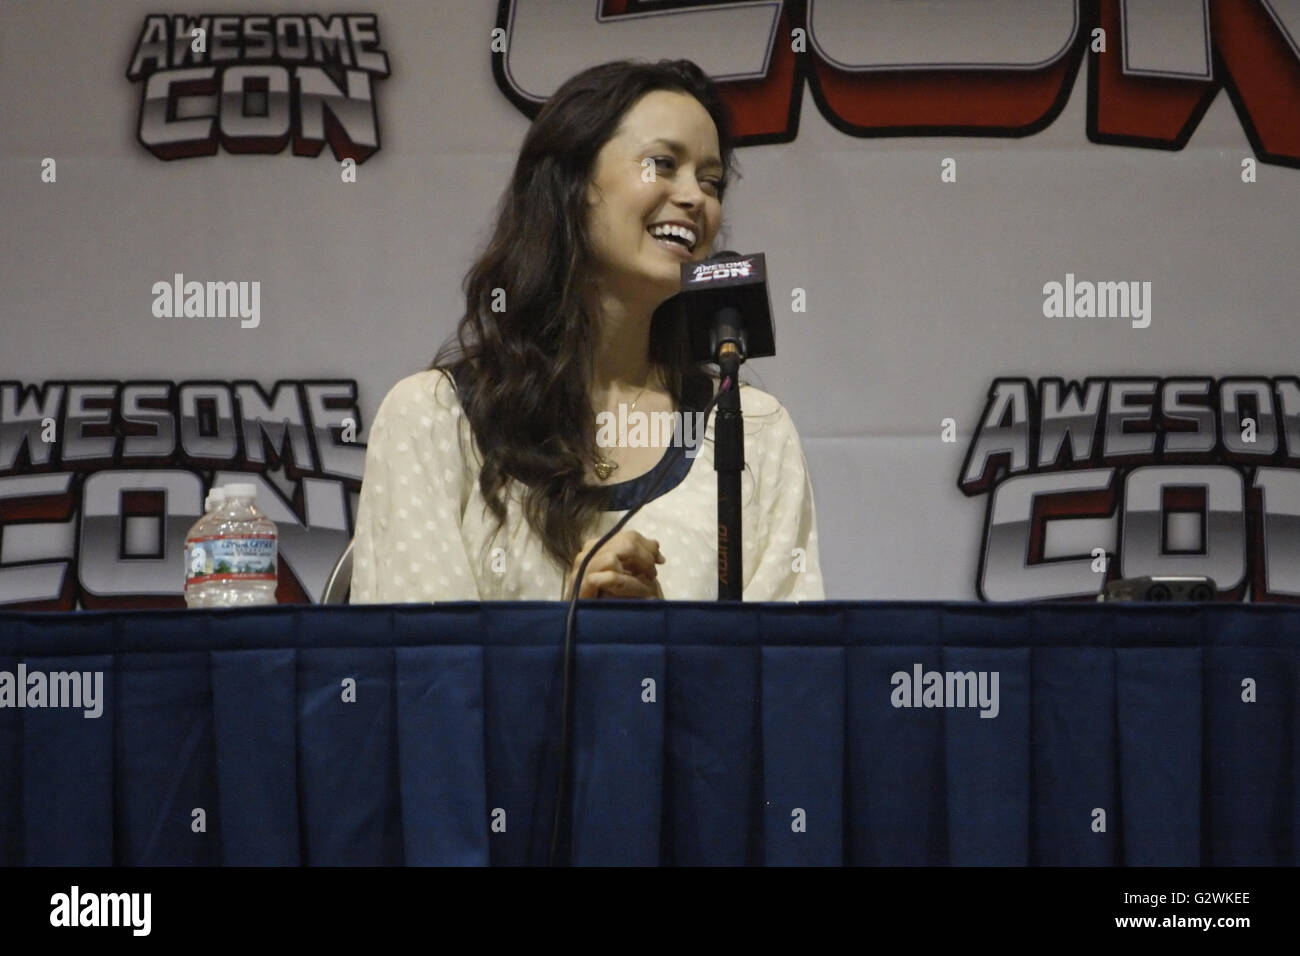 Washington, District of Columbia, USA. 4th June, 2016. Summer Glau, who has portrayed characters such as River Tam on Firefly and Cameron Philips on Terminator: The Sarah Connor Chronicles, with a big smile as she takes a question at Awesome Con 2016, held in Washington, DC. Credit:  Evan Golub/ZUMA Wire/Alamy Live News Stock Photo